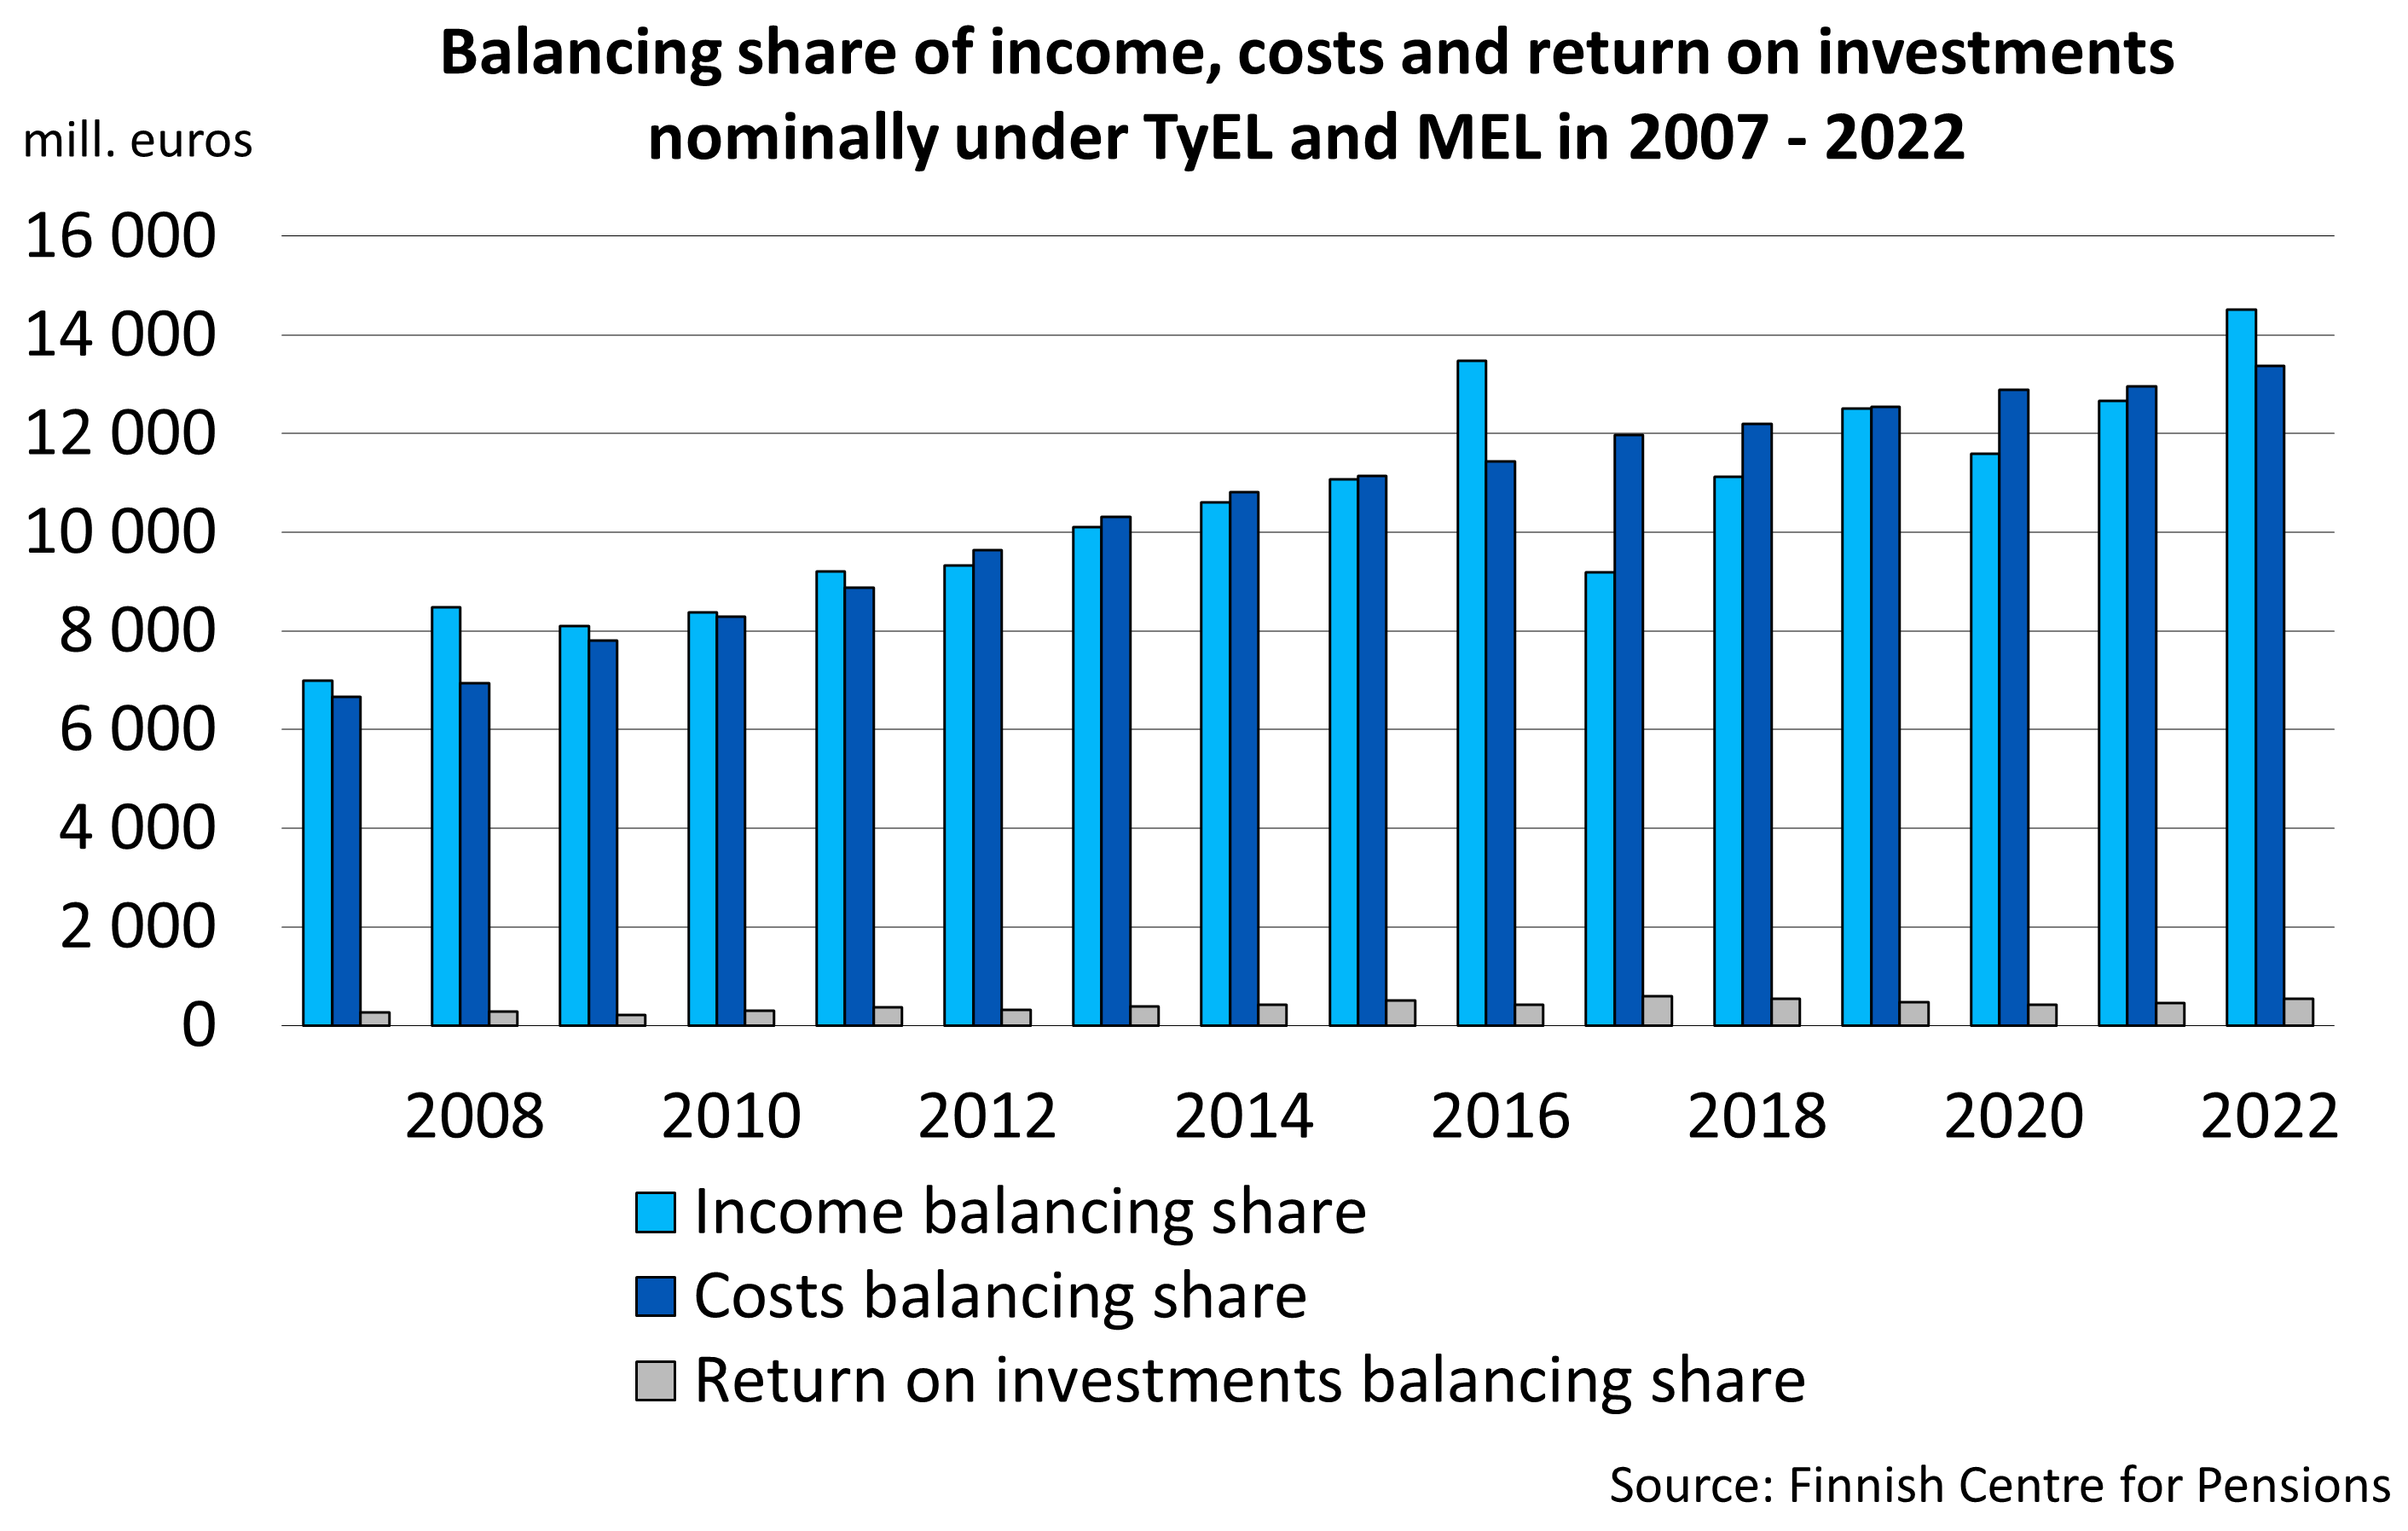 Balancing share of income, costs and return on investments nominally under TyEL and MEL in 2007 - 2020